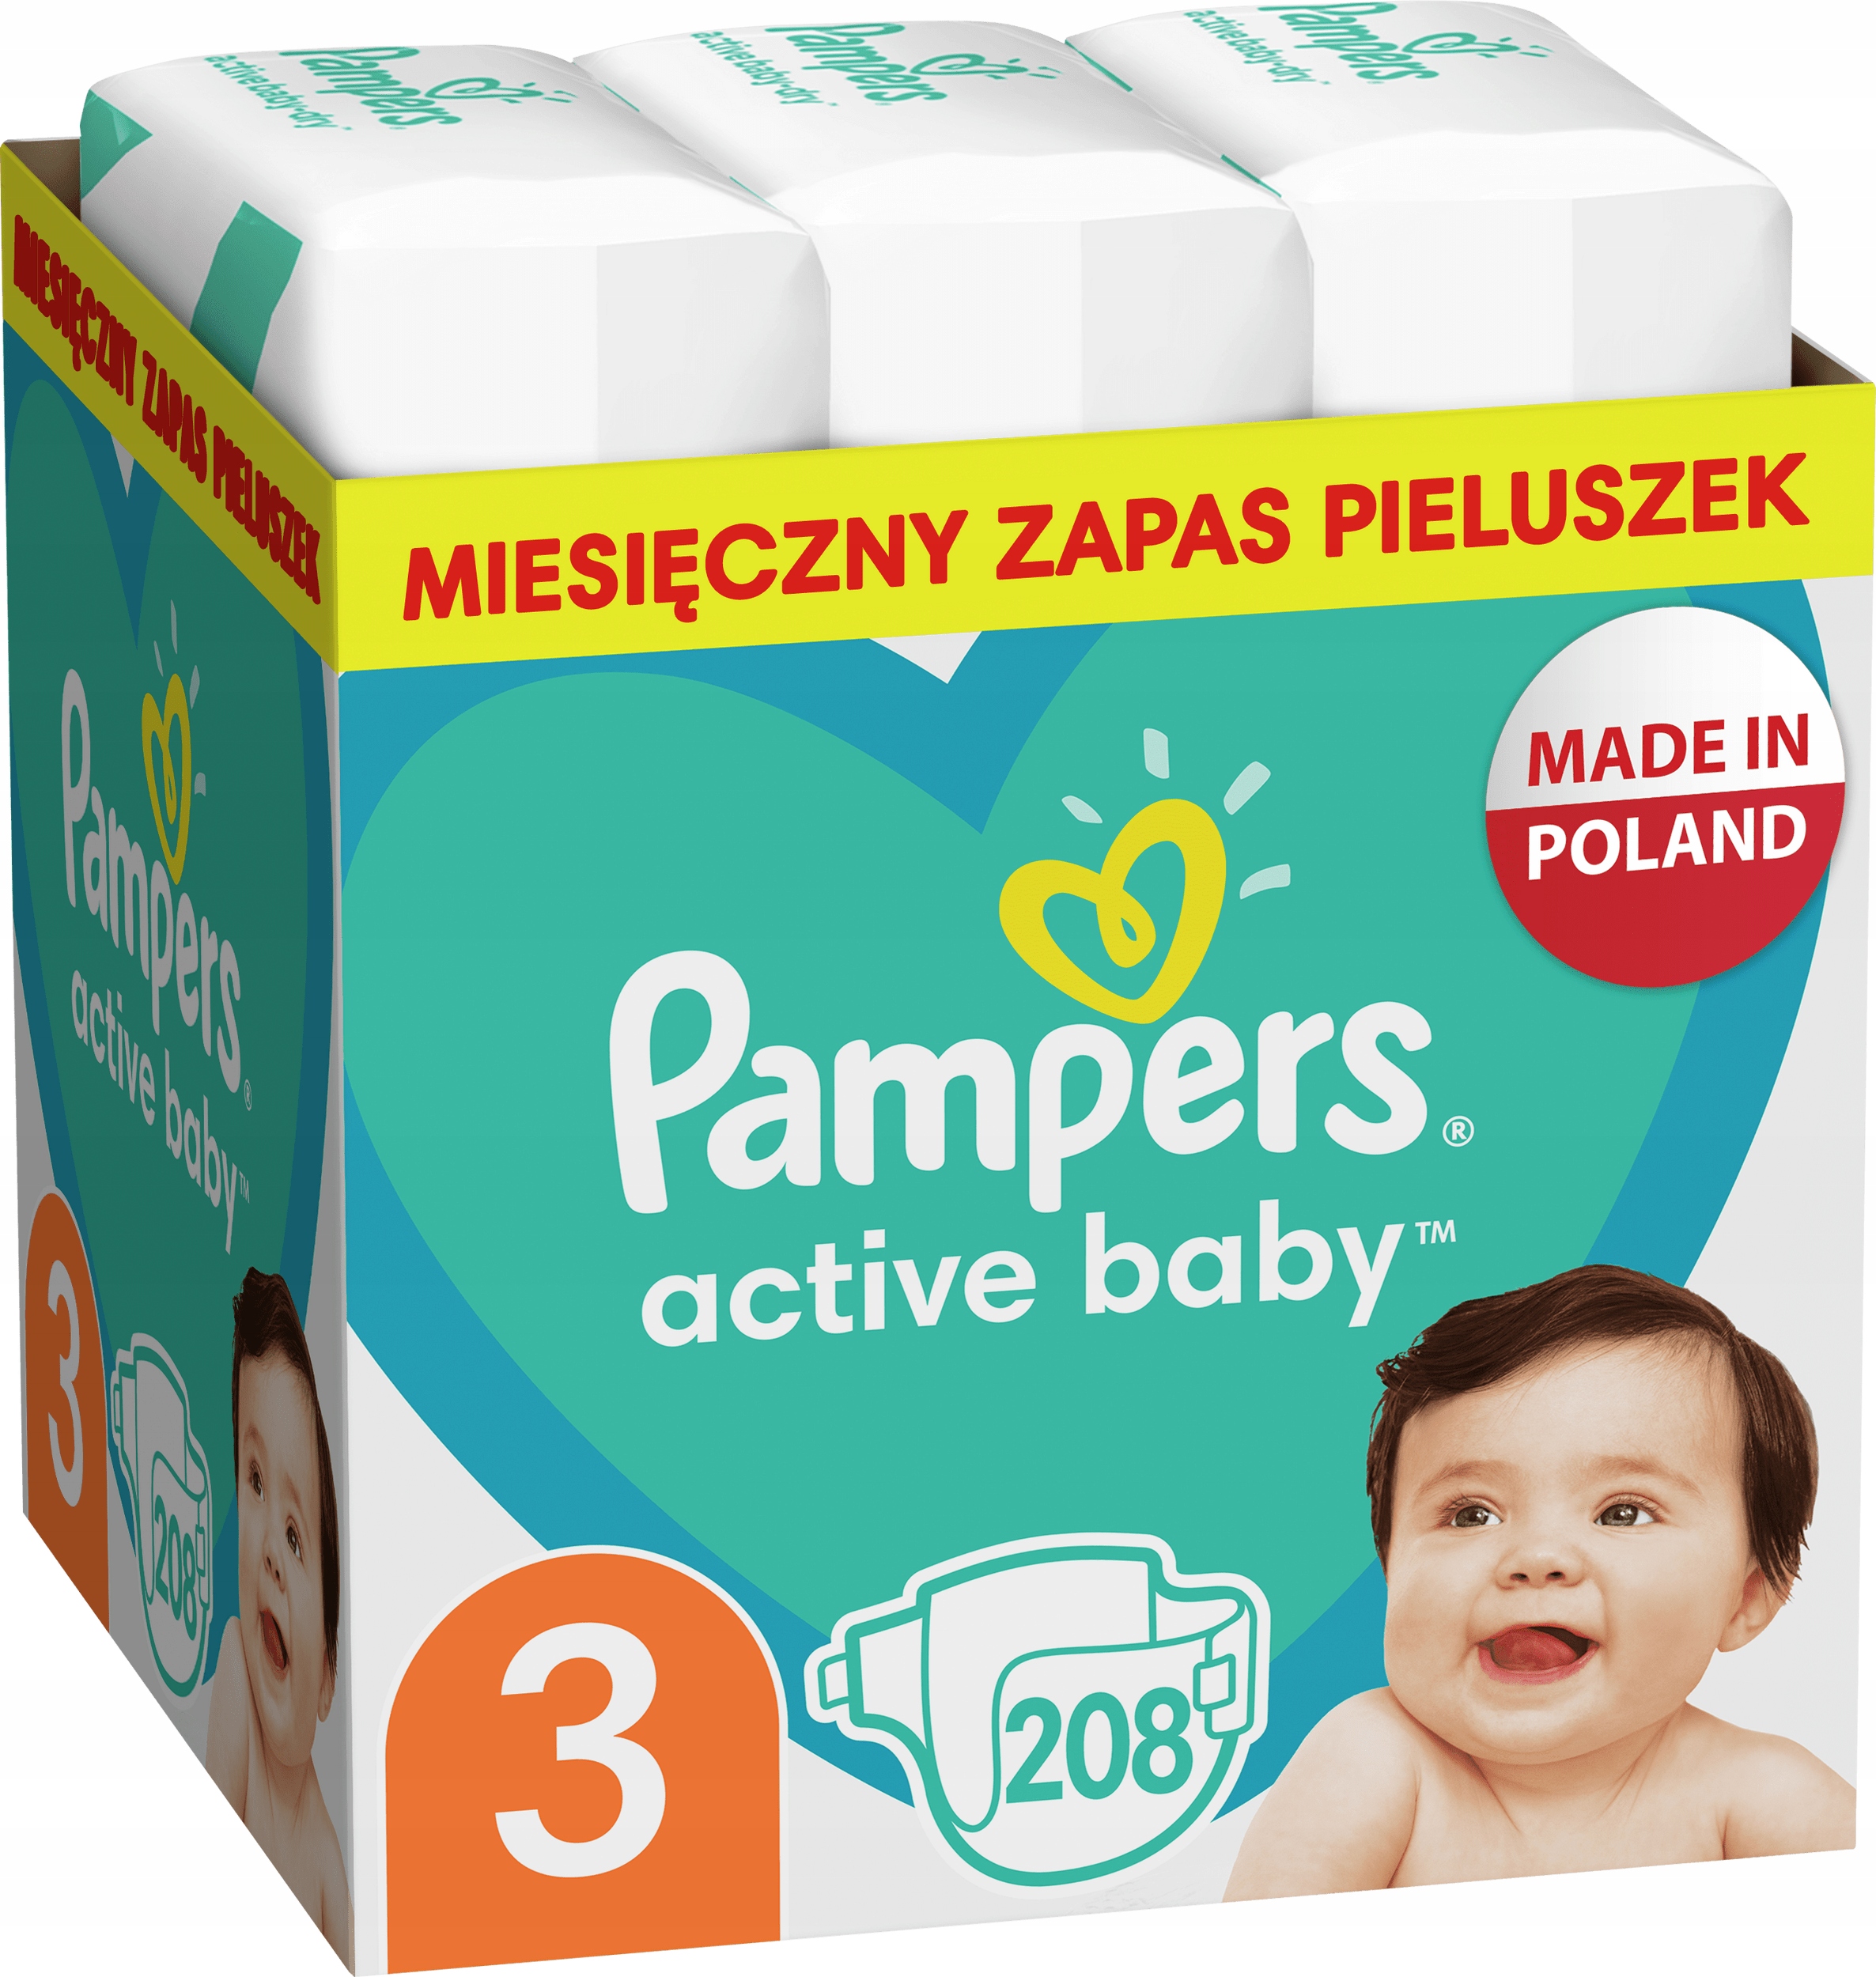 promocja pampers 3 dry active